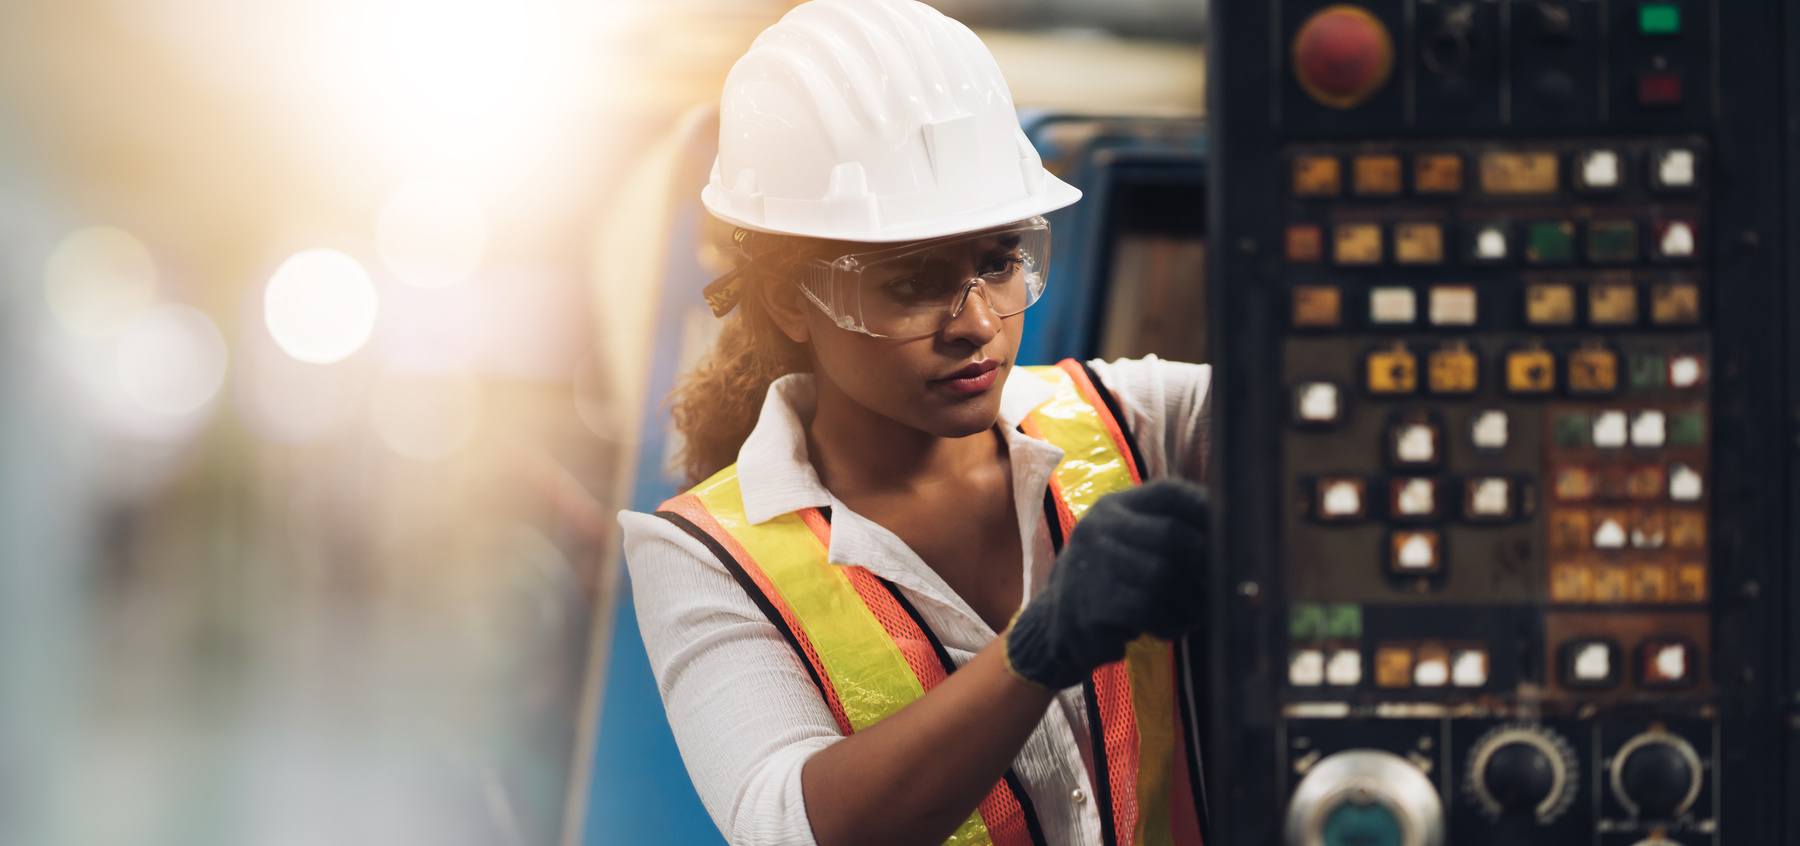 Female professional engineering worker with hardhat